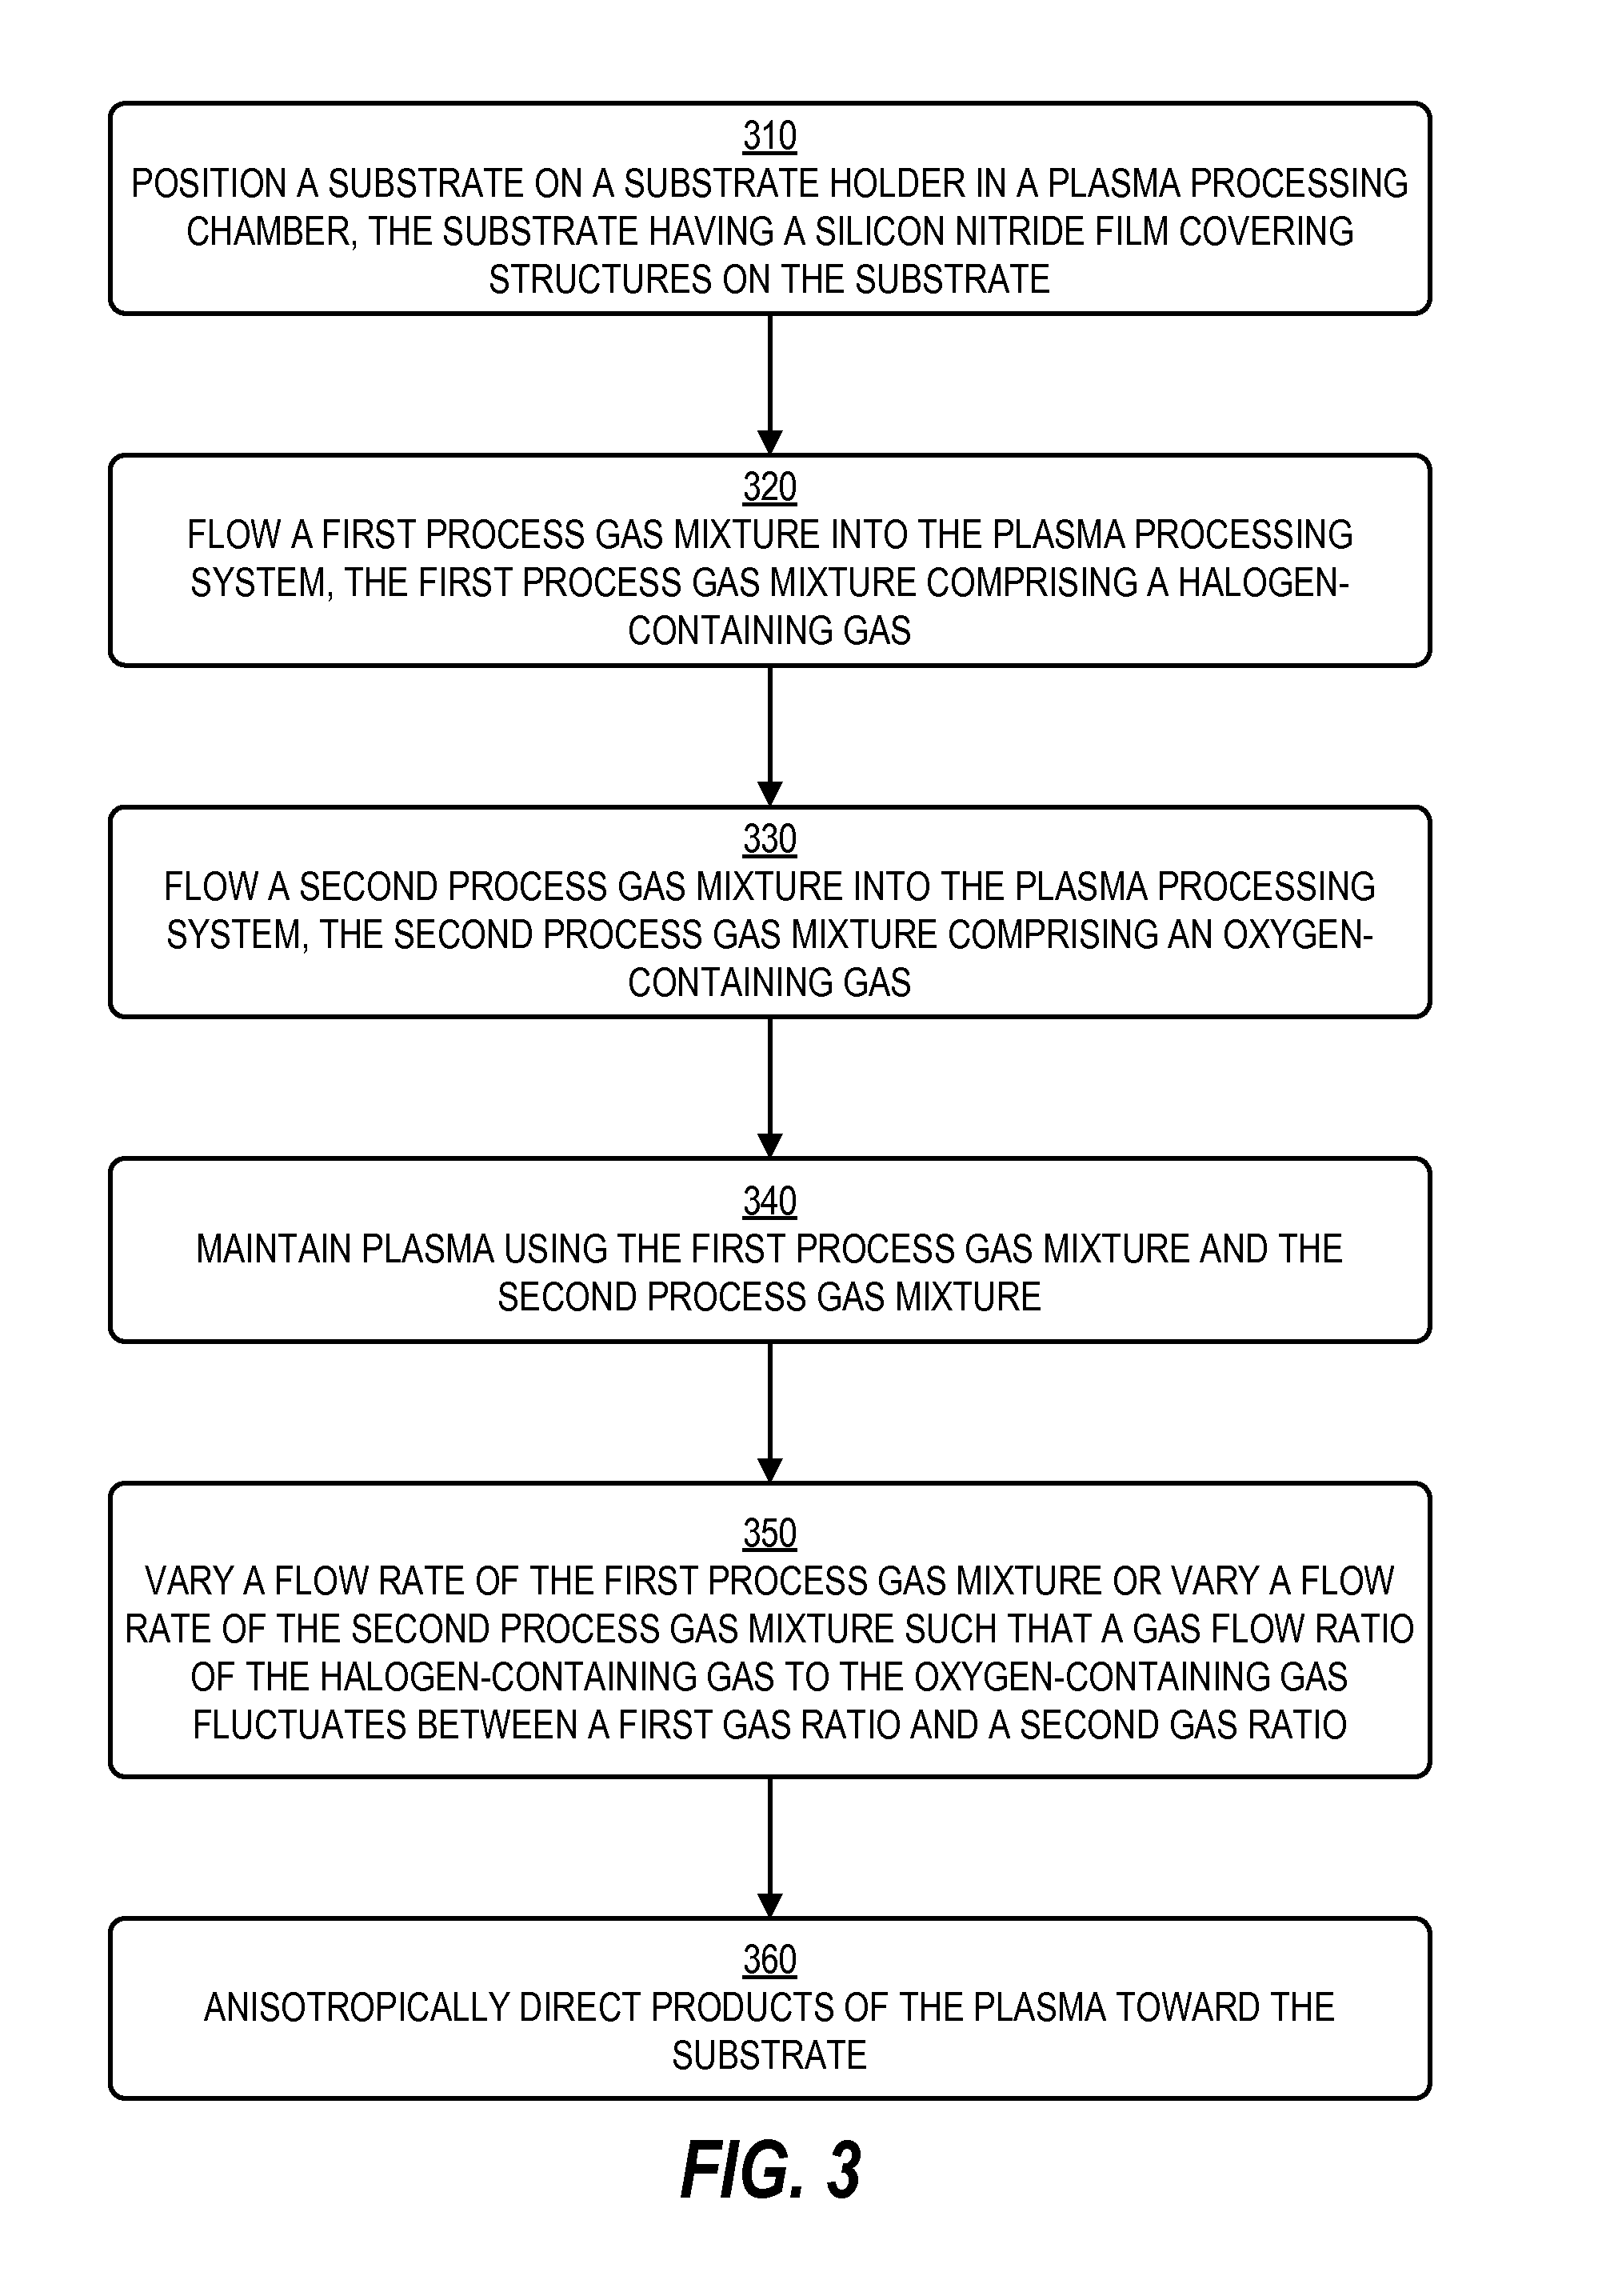 Method to improve etch selectivity during silicon nitride spacer etch